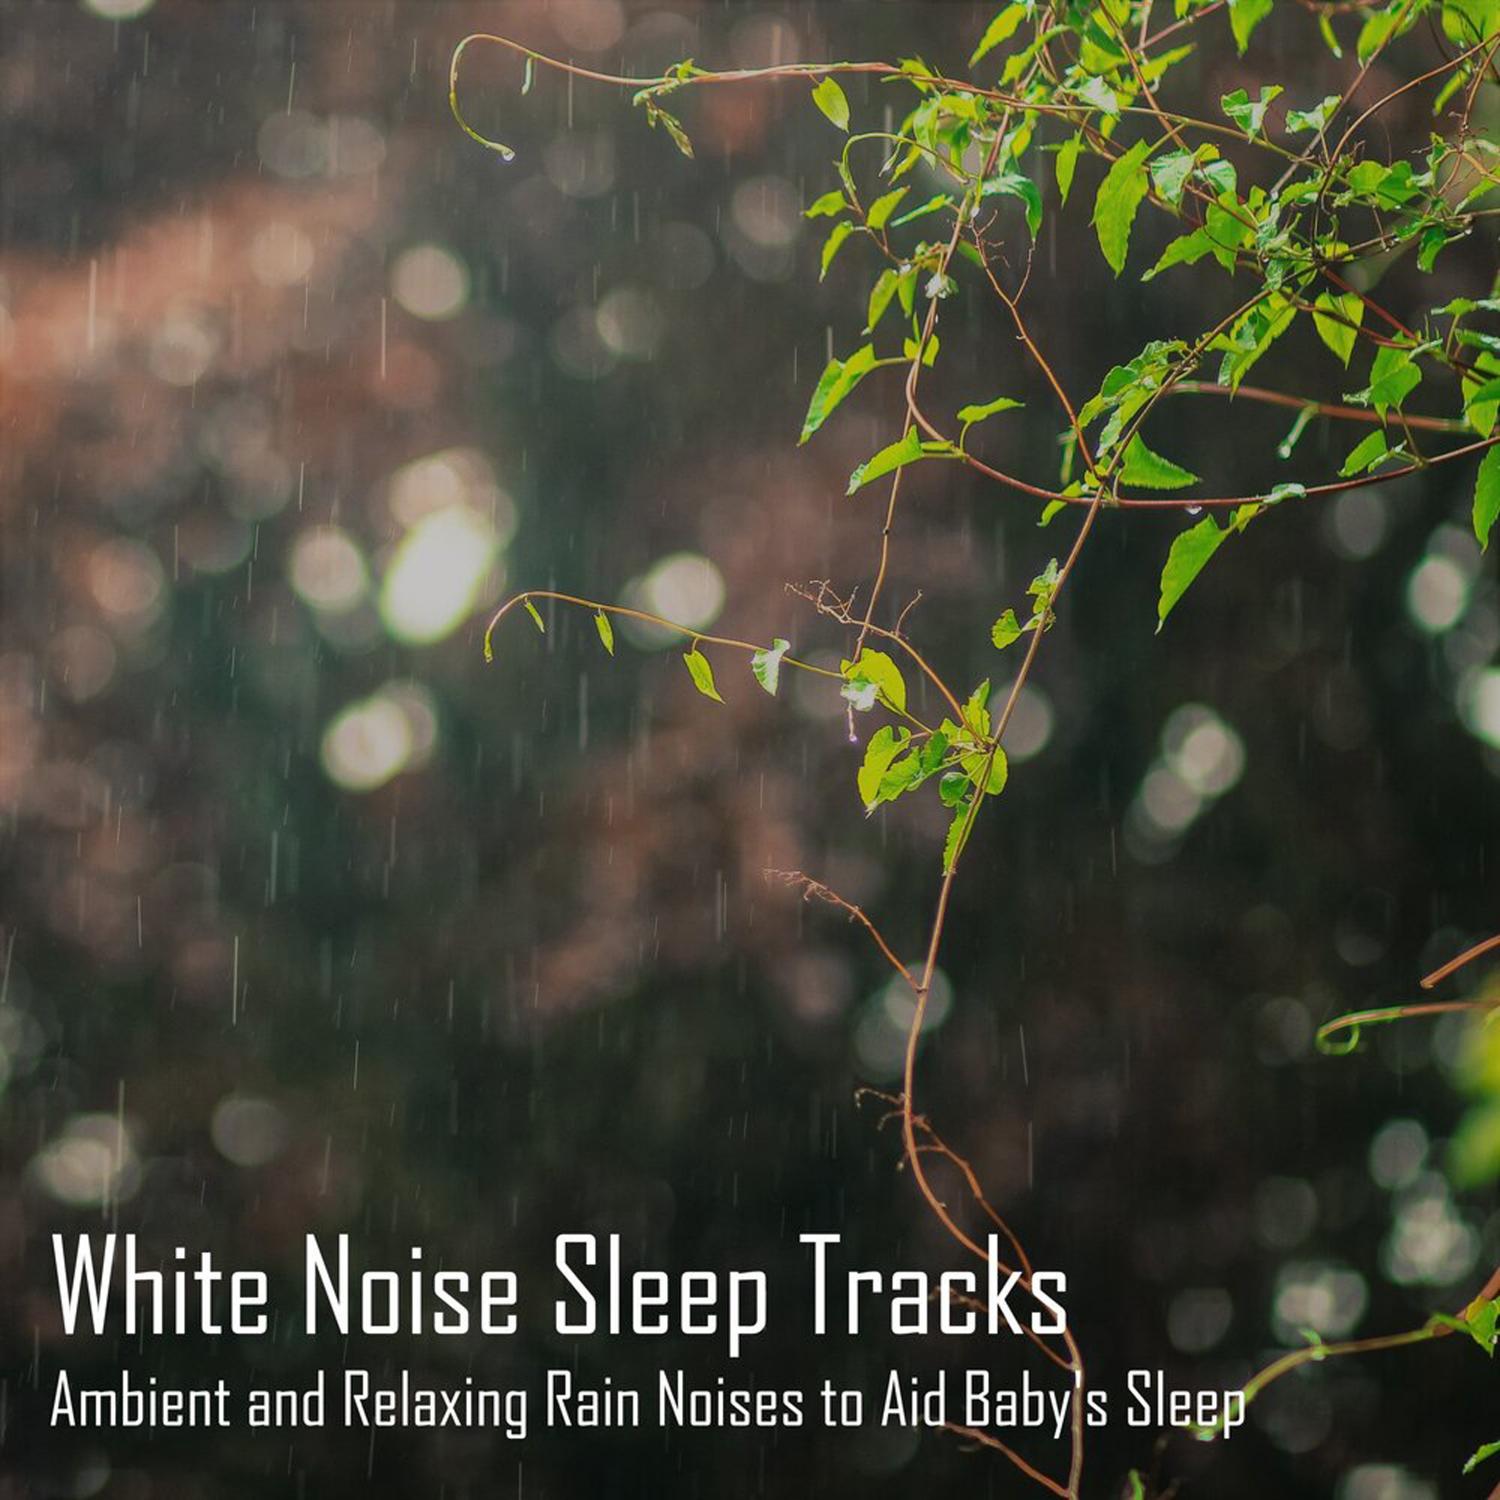 18 White Noise Sleep Tracks. Ambient and Relaxing Rain Noises to Aid Baby's Sleep